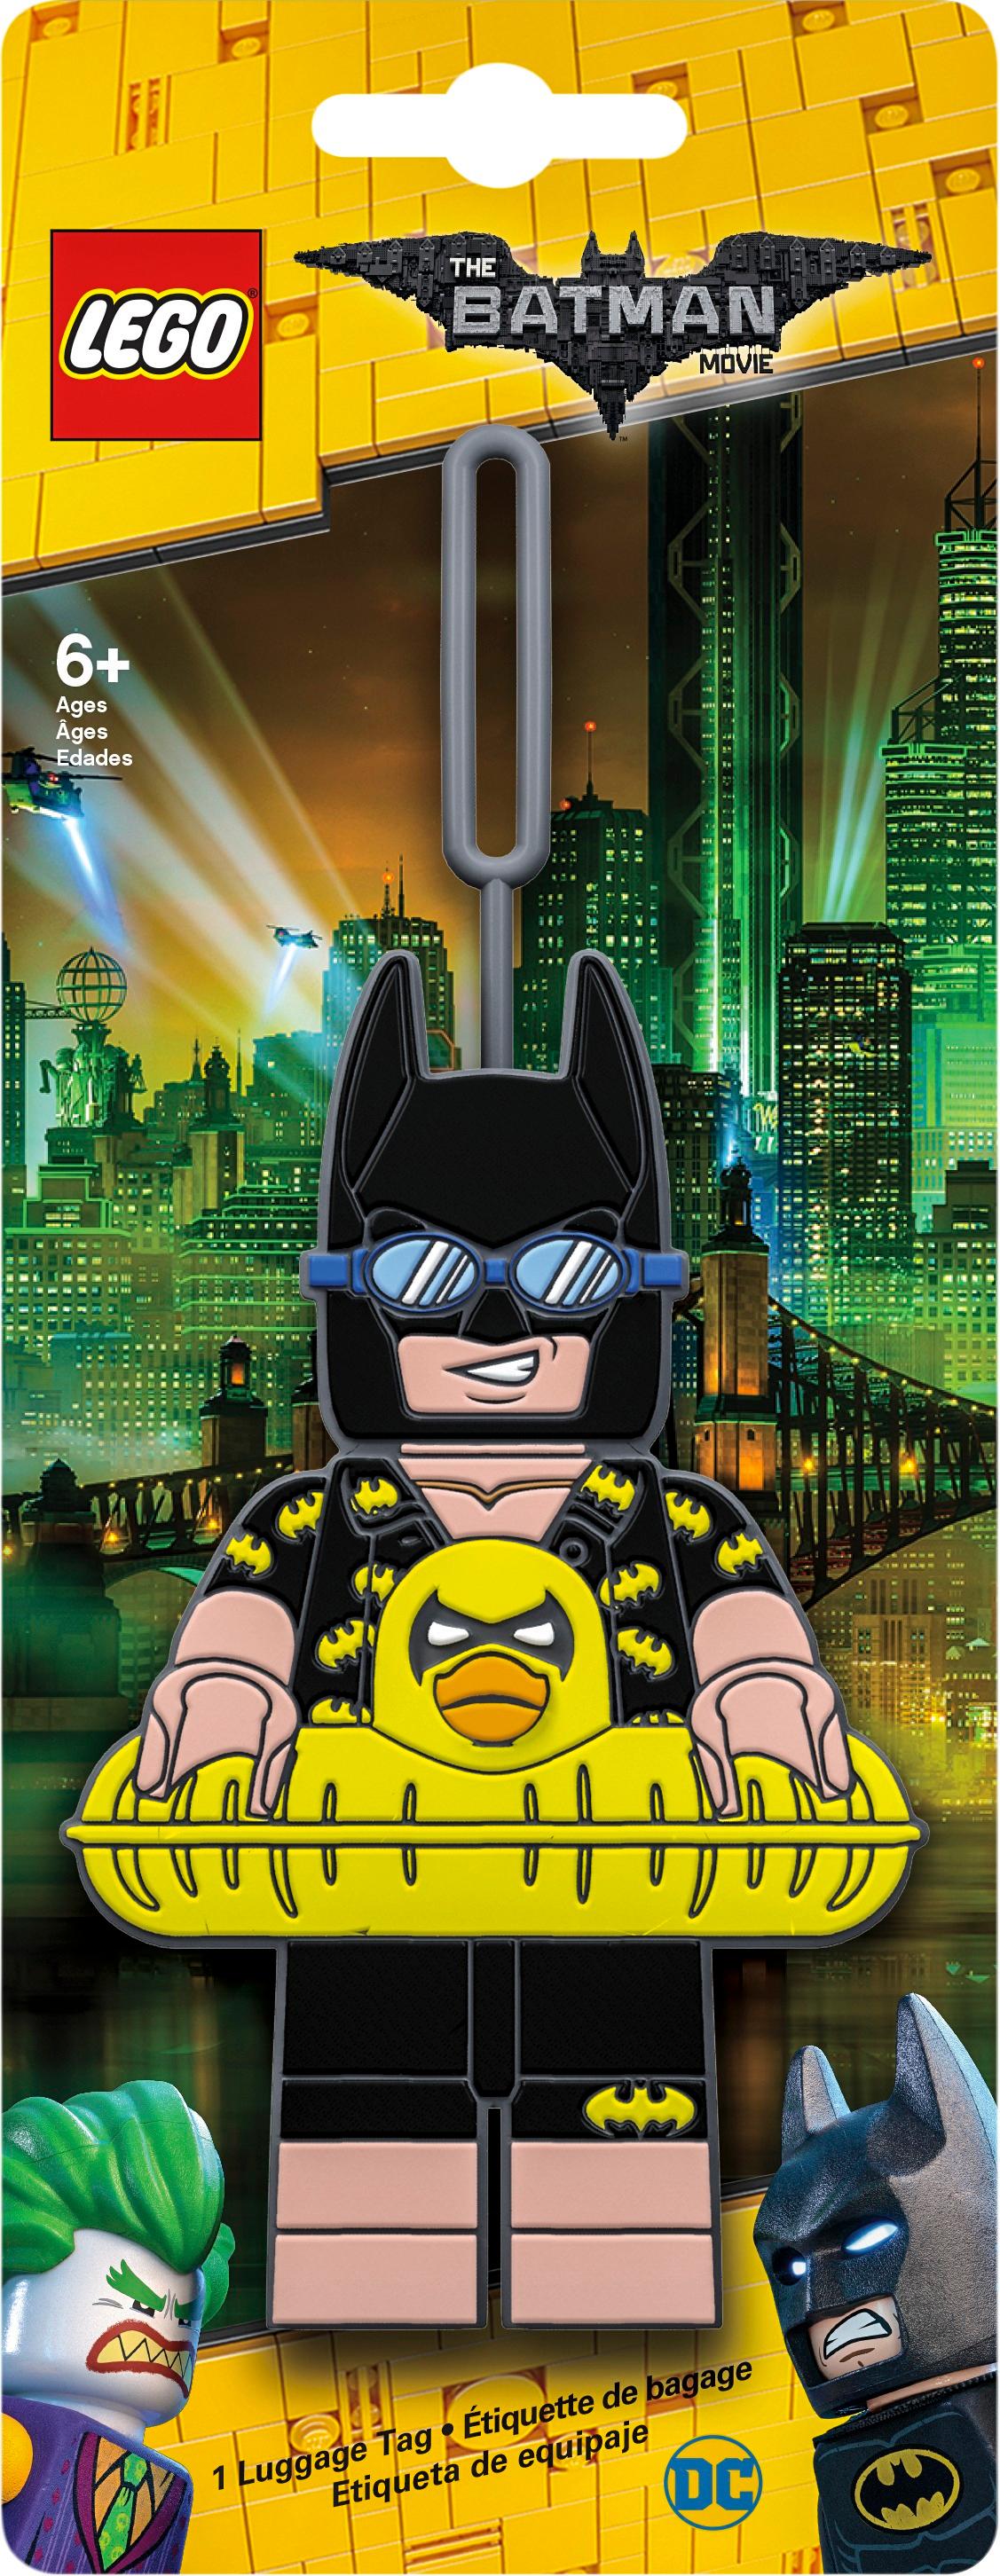 The Lego Batman Movie poster : 11 x 17 inches - Lego poster - Batman poster